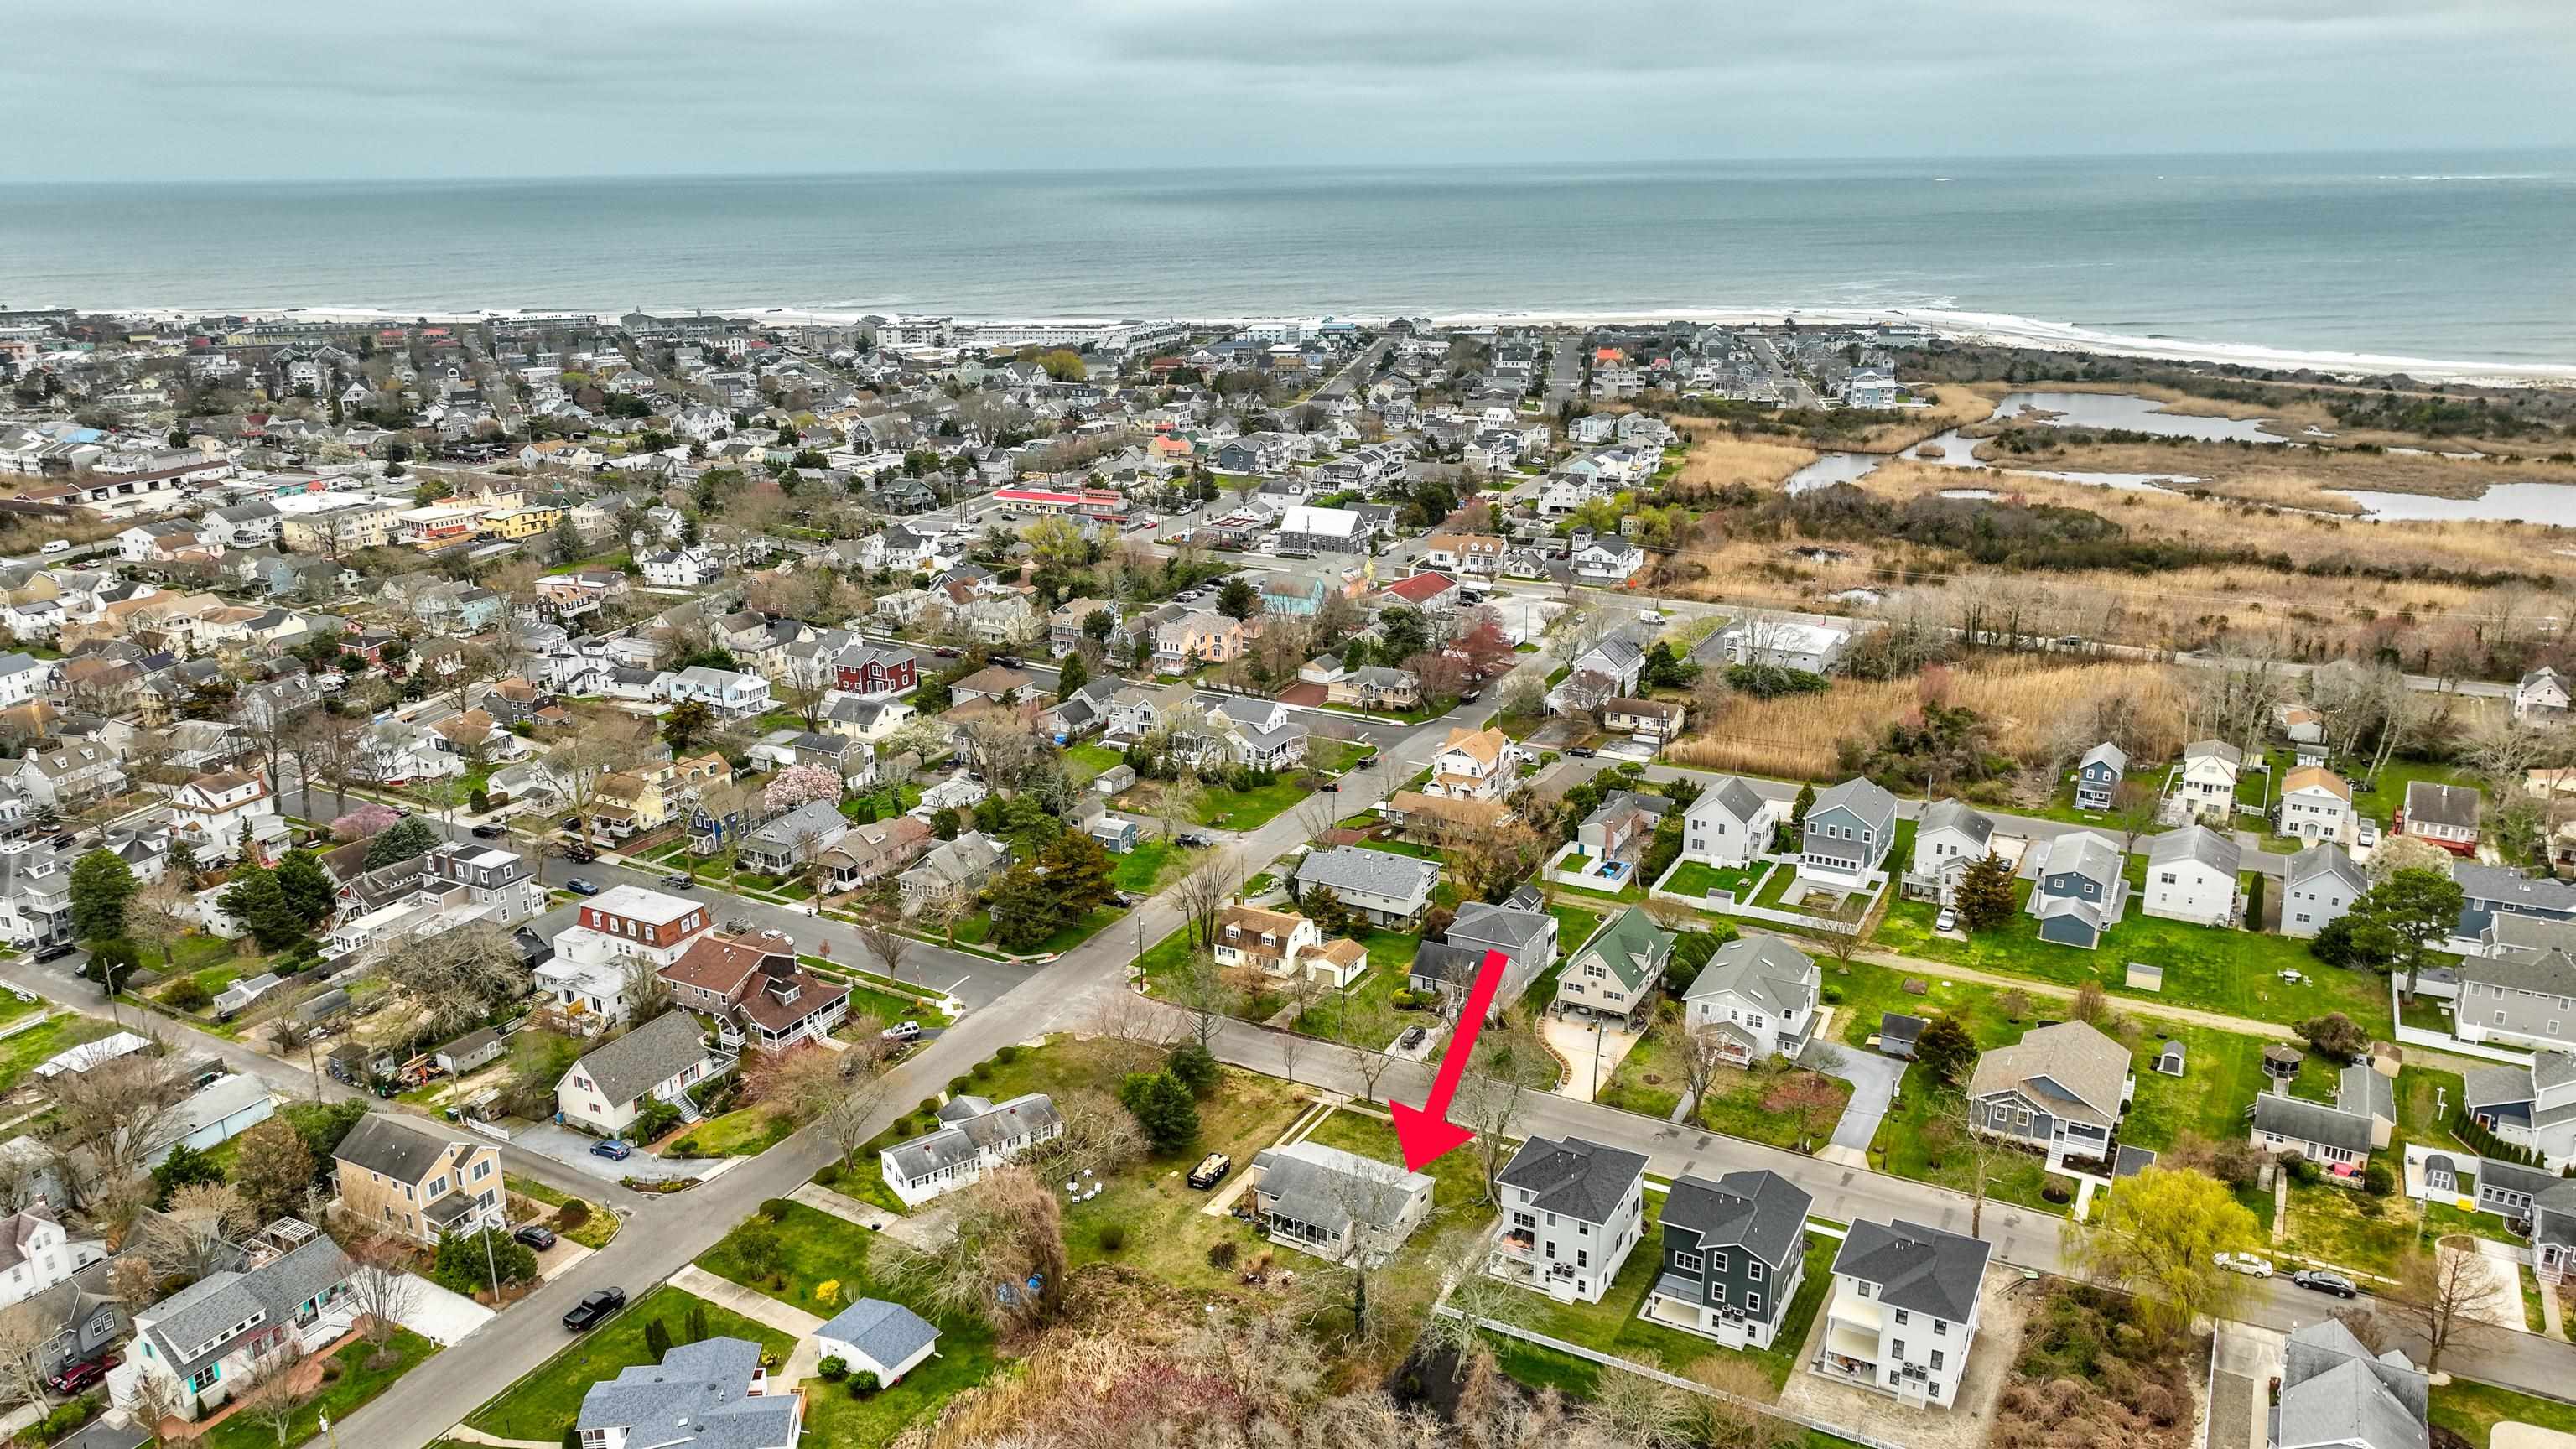 205 Third Avenue - West Cape May